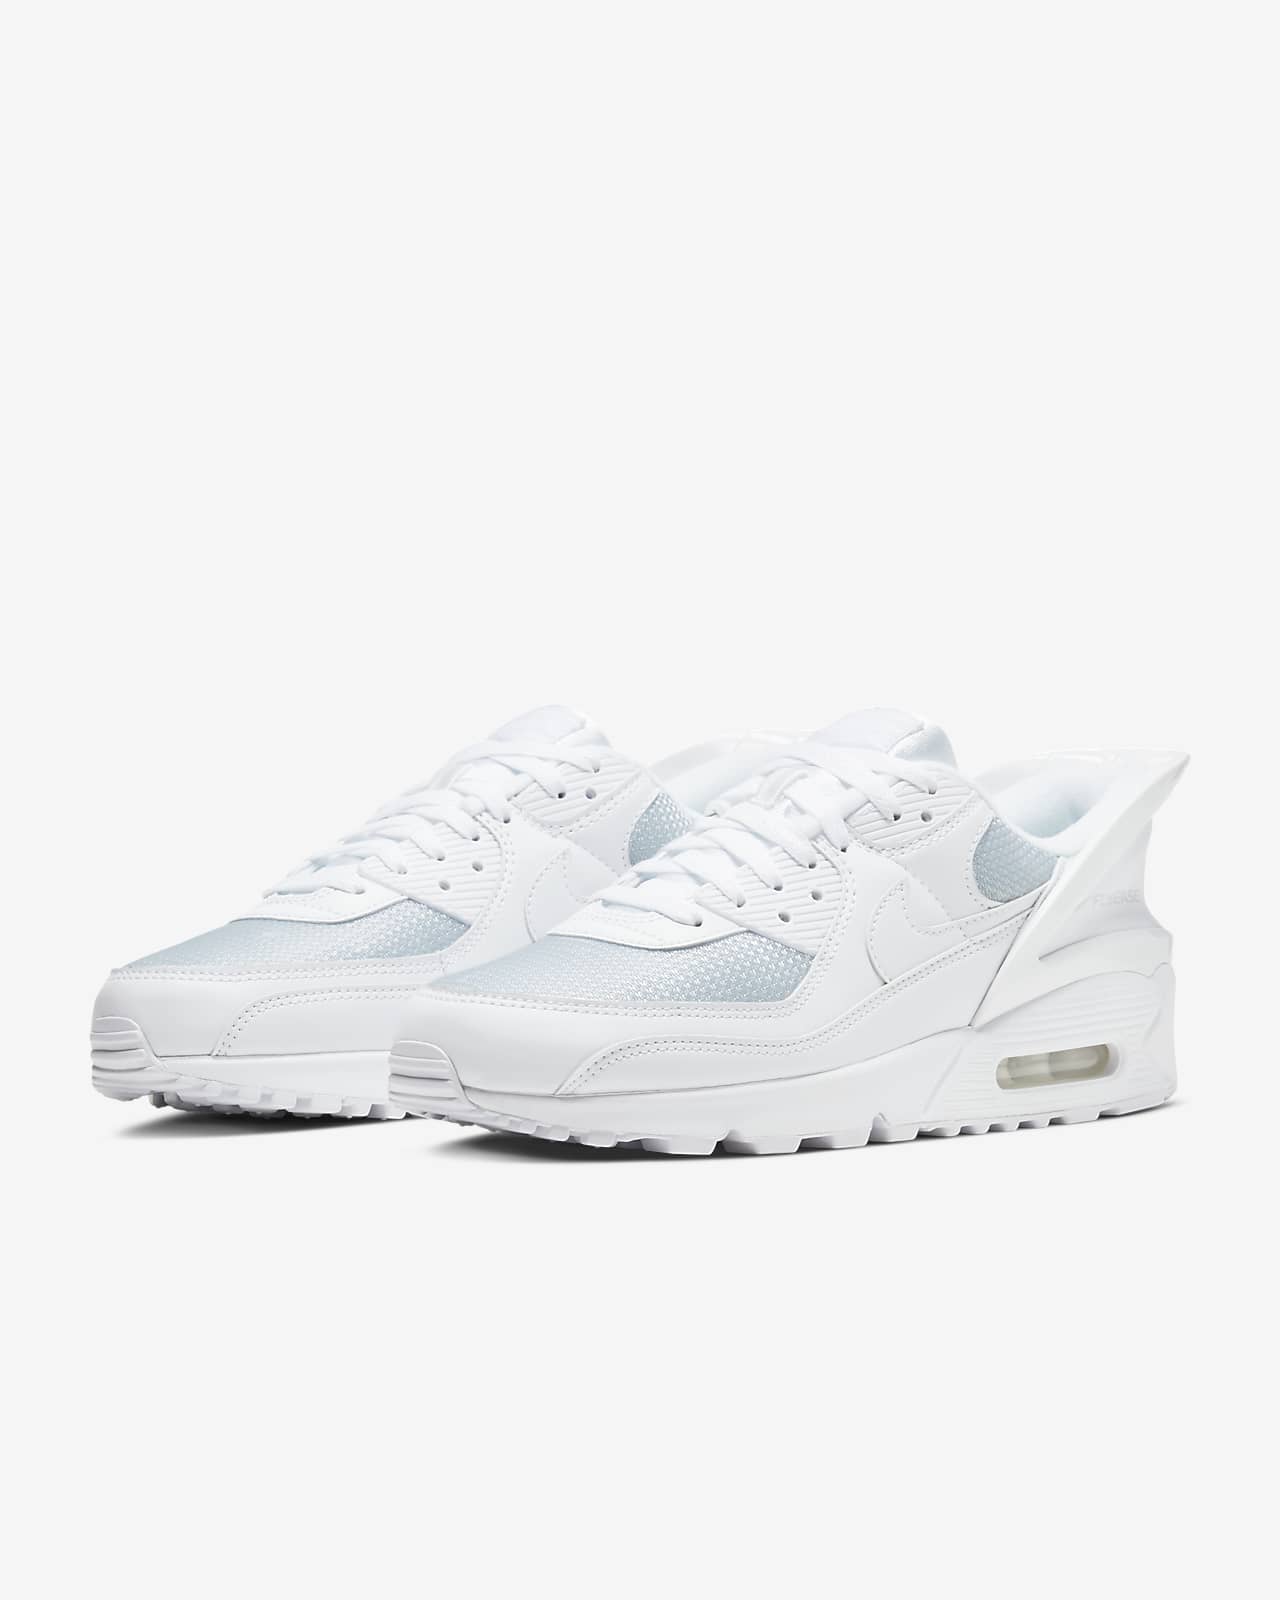 nike air max fly price